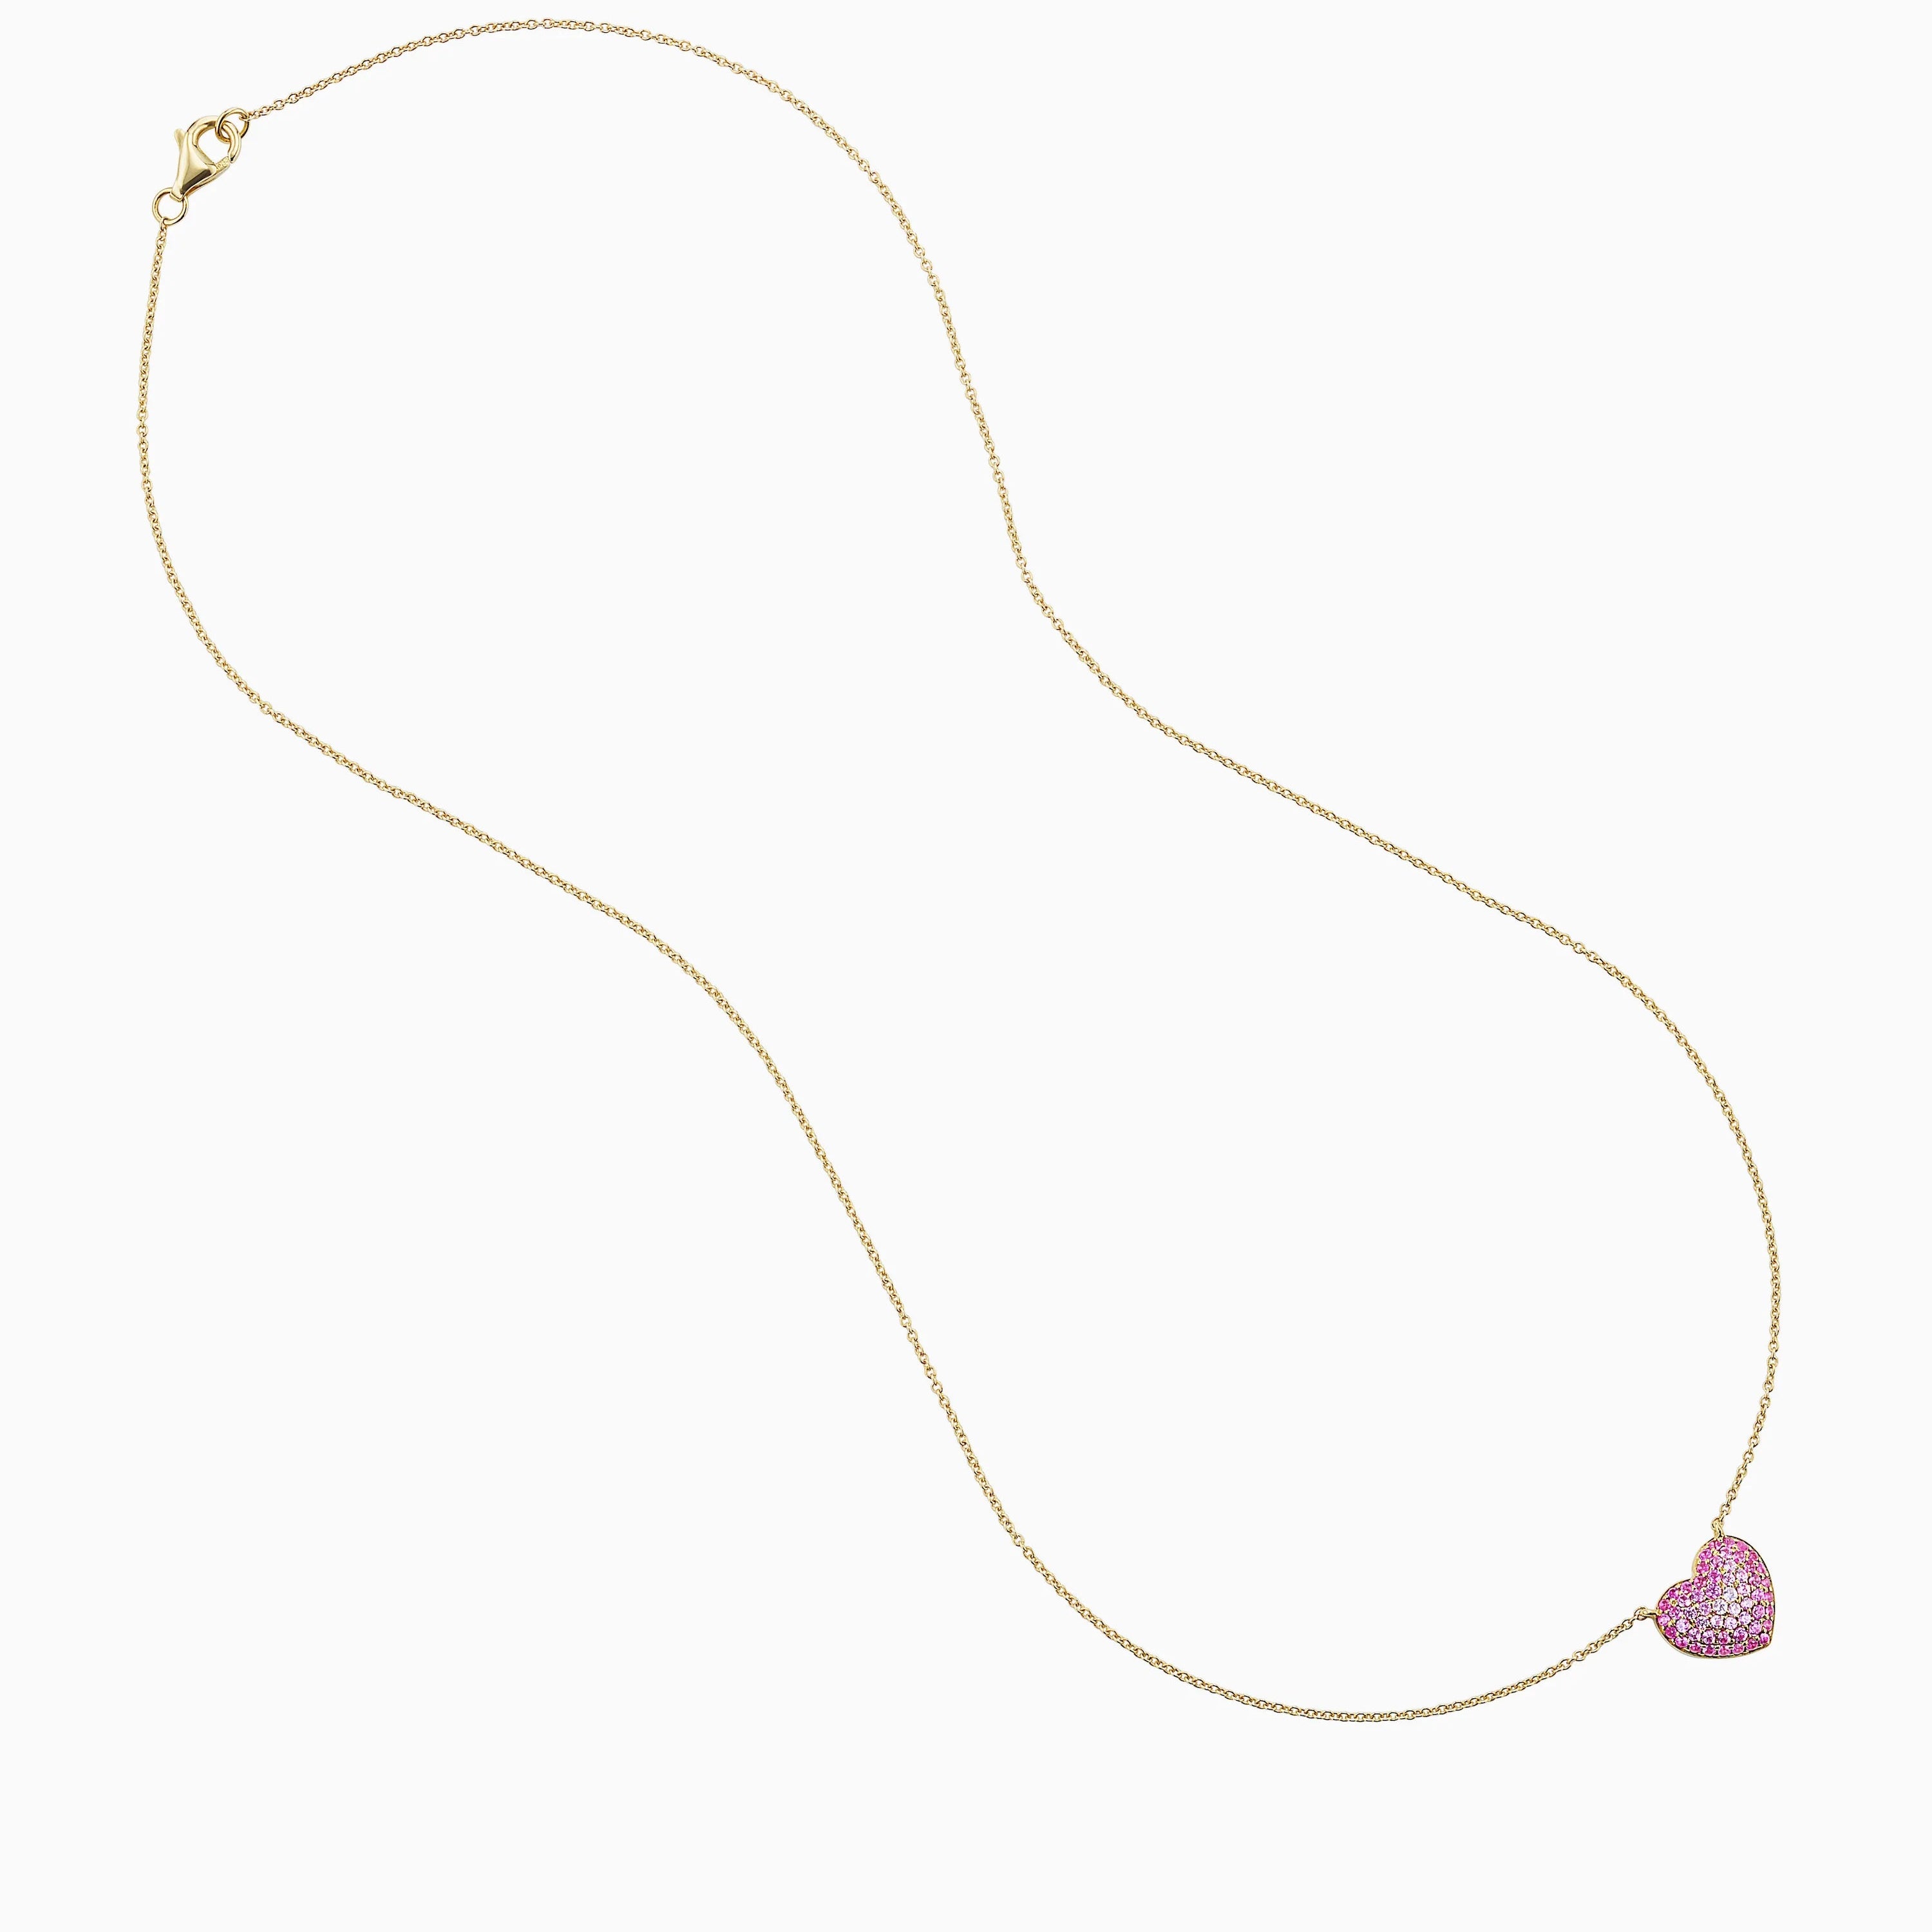 Emily P Wheeler Lucy Heart Necklace with ombre pink sapphire, 16" long - Be On Park